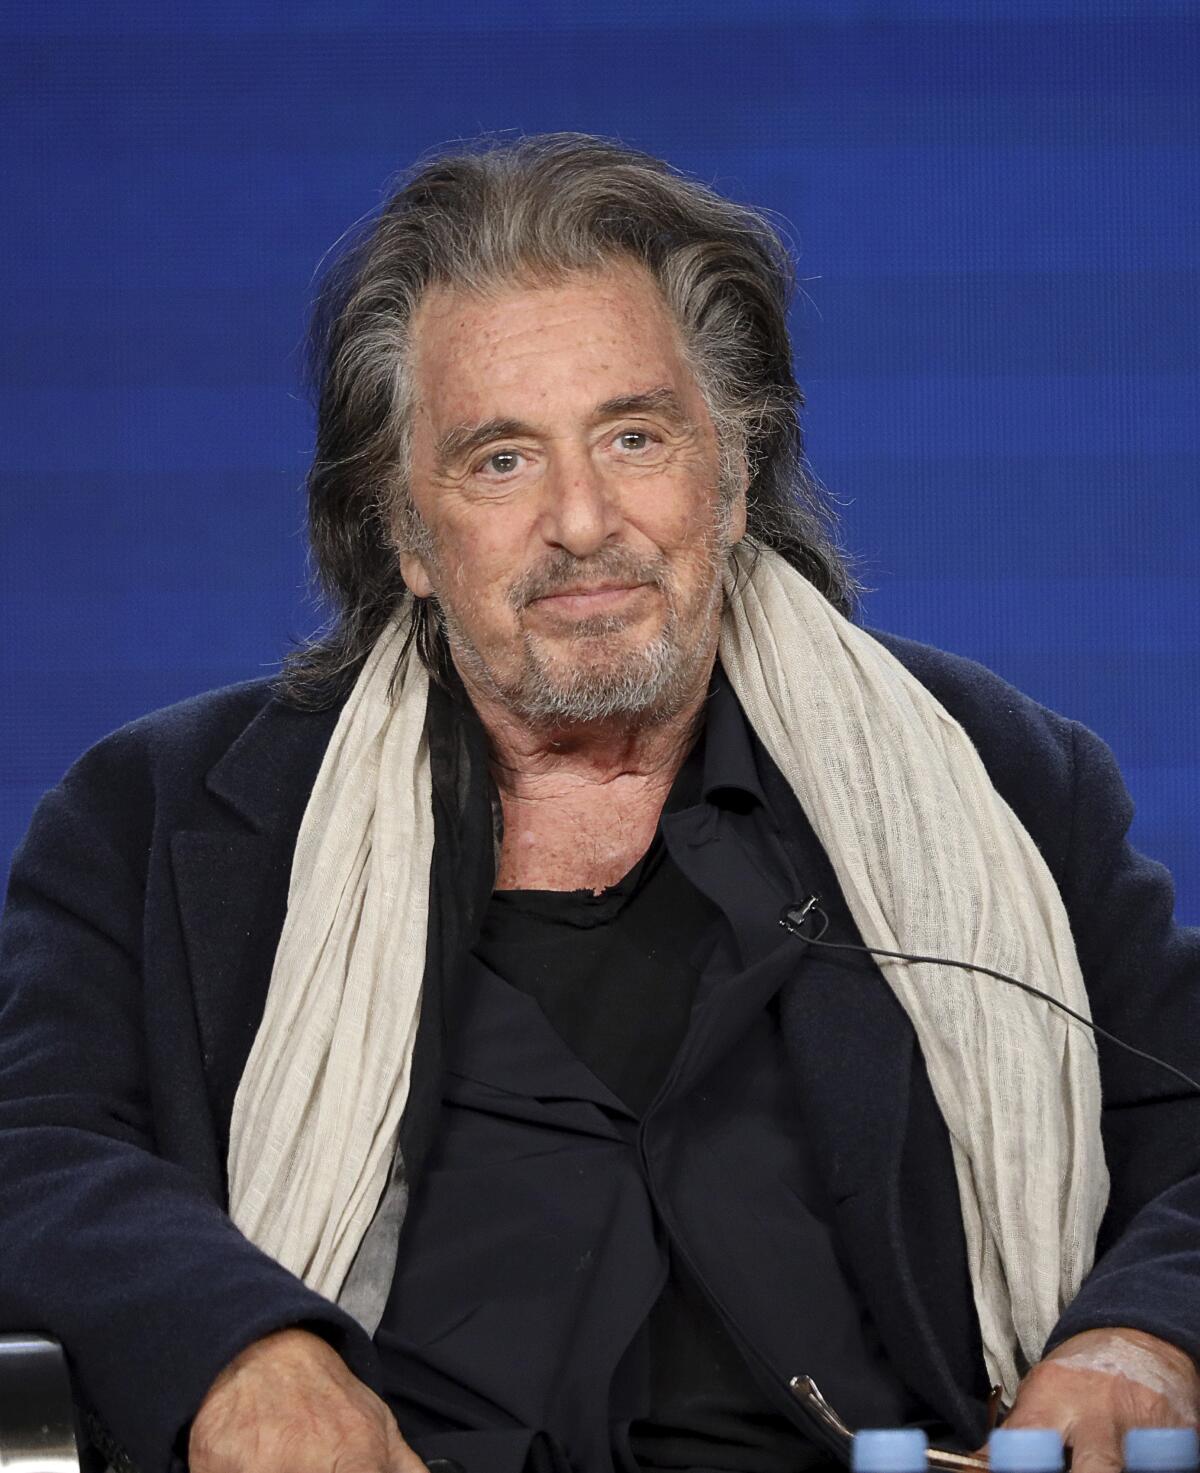 Al Pacino is wearing a black coat with a beige scarf as he smiles and sits on a stage.